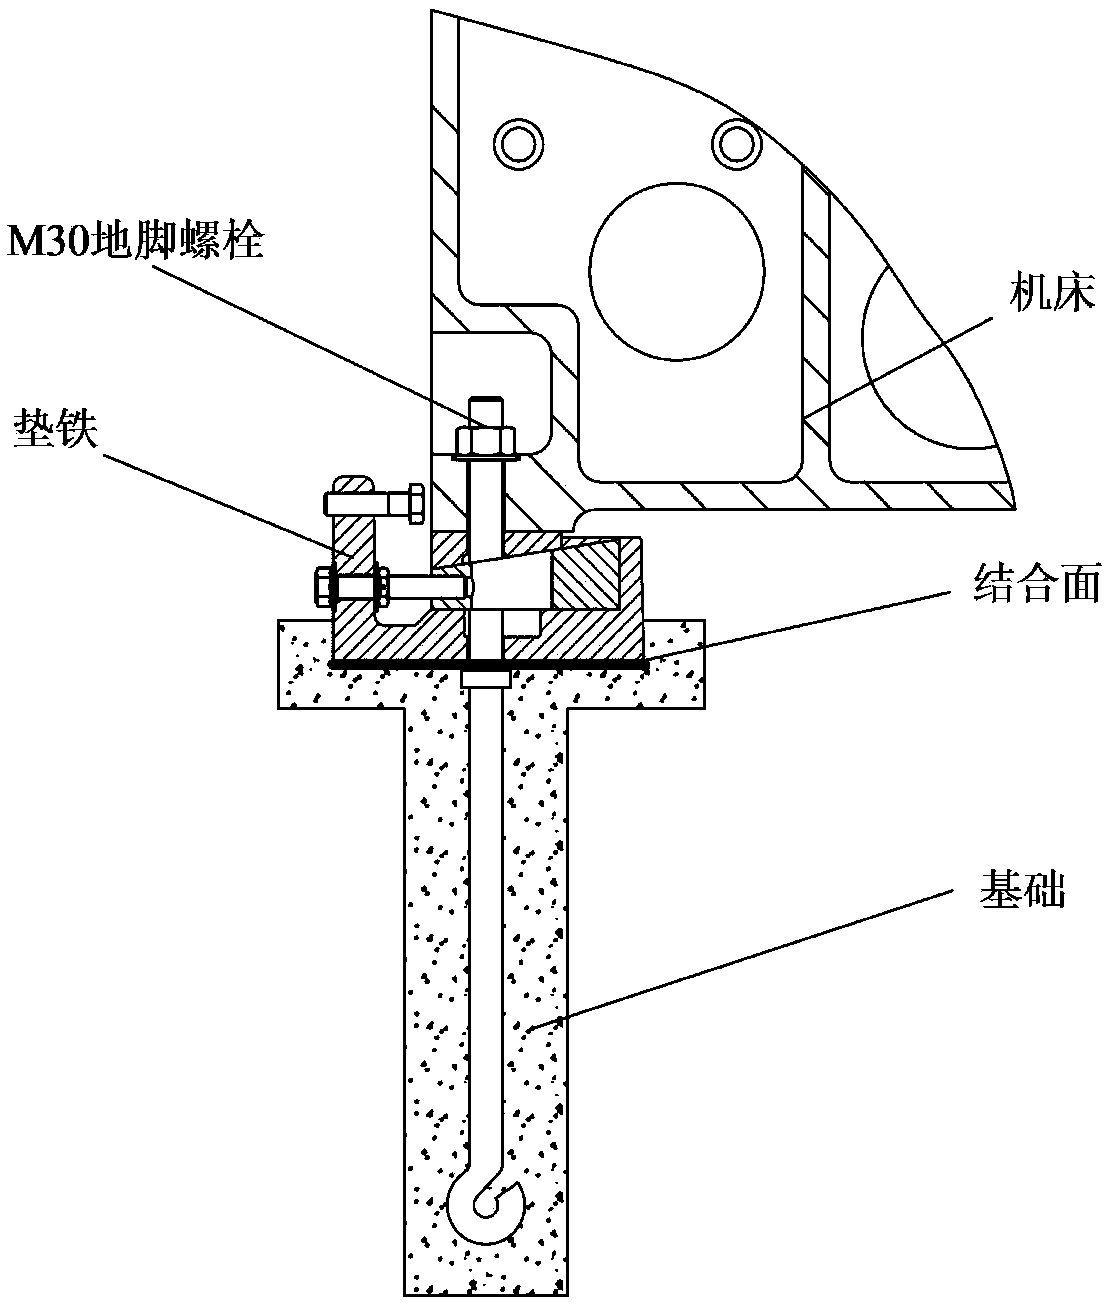 A Calculation Method of Contact Stiffness of Machine Tool-Foundation Interface Considering Concrete Asperity Breakage